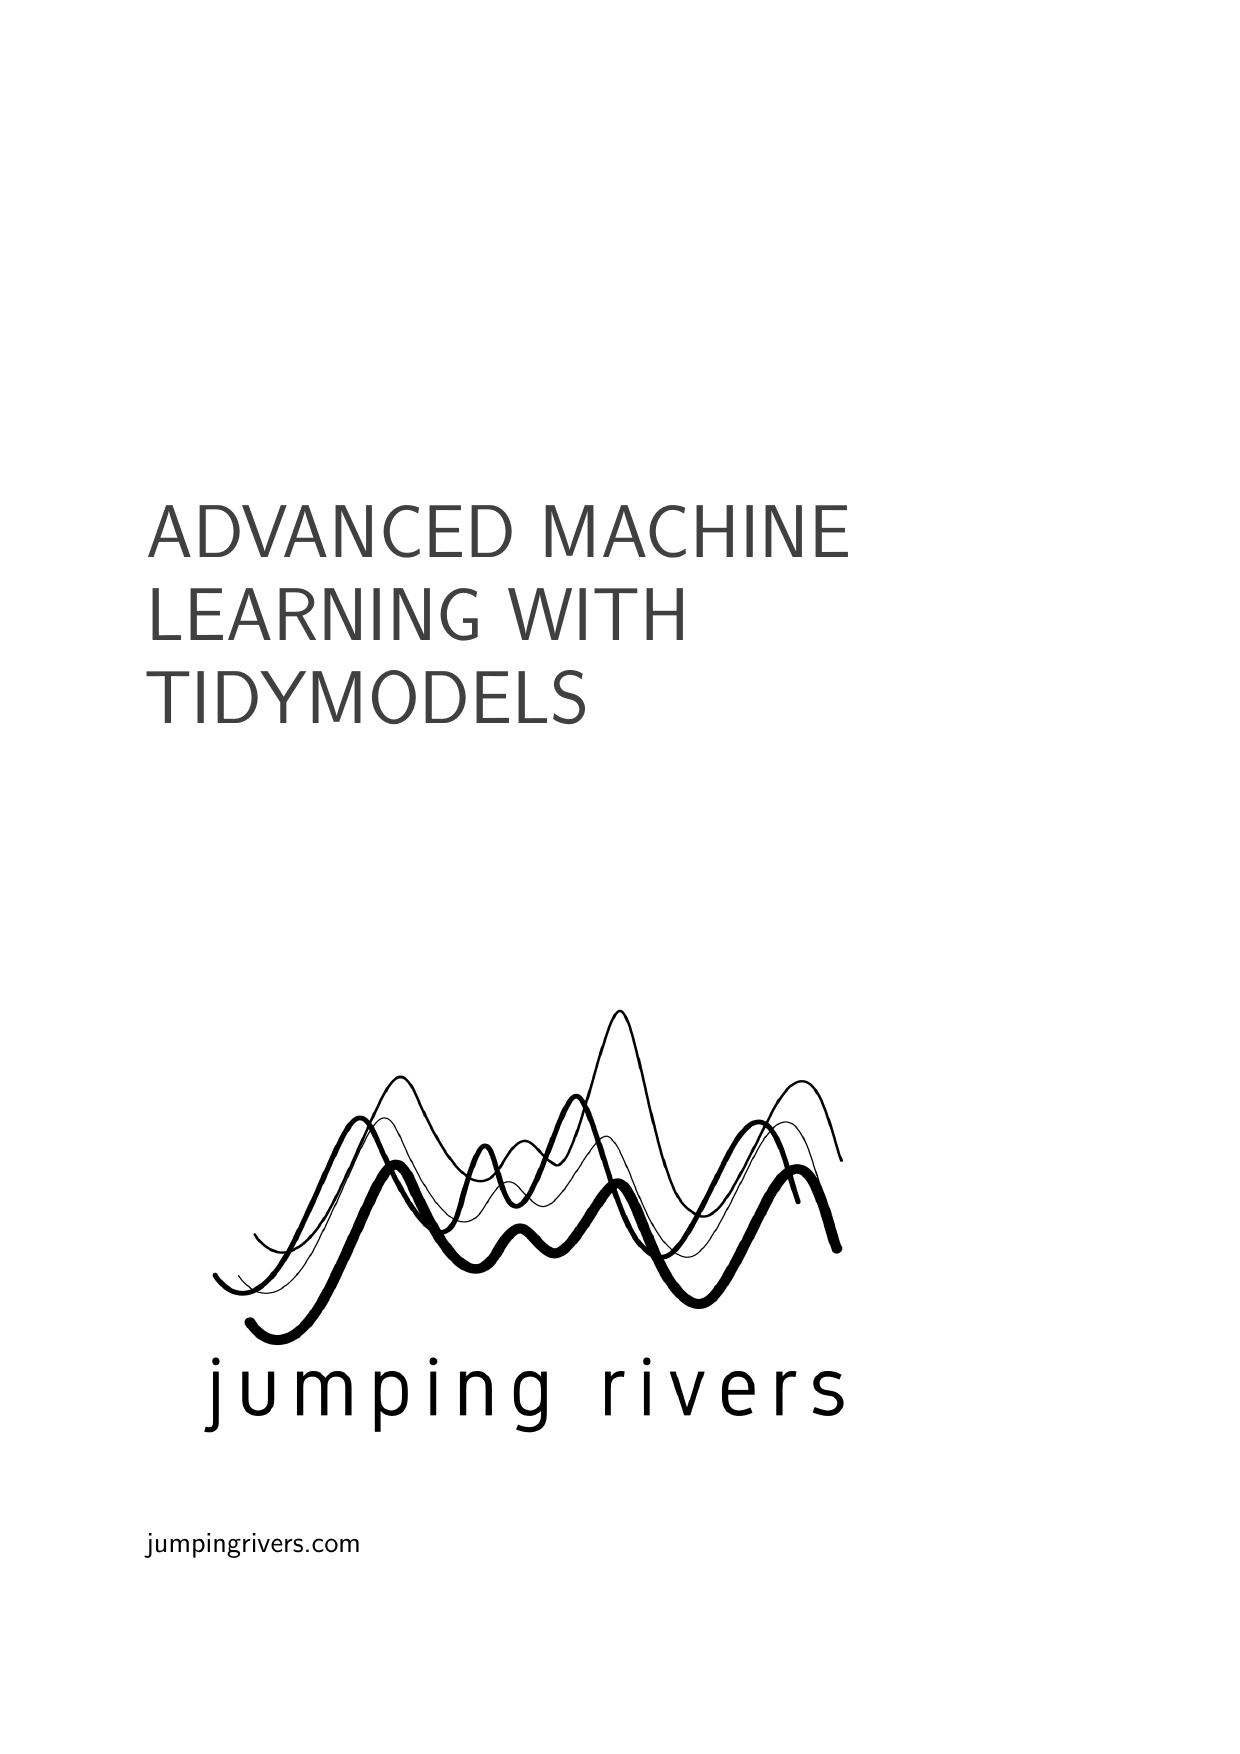 Page 1 of example course material for  Advanced Machine Learning with Tidymodels